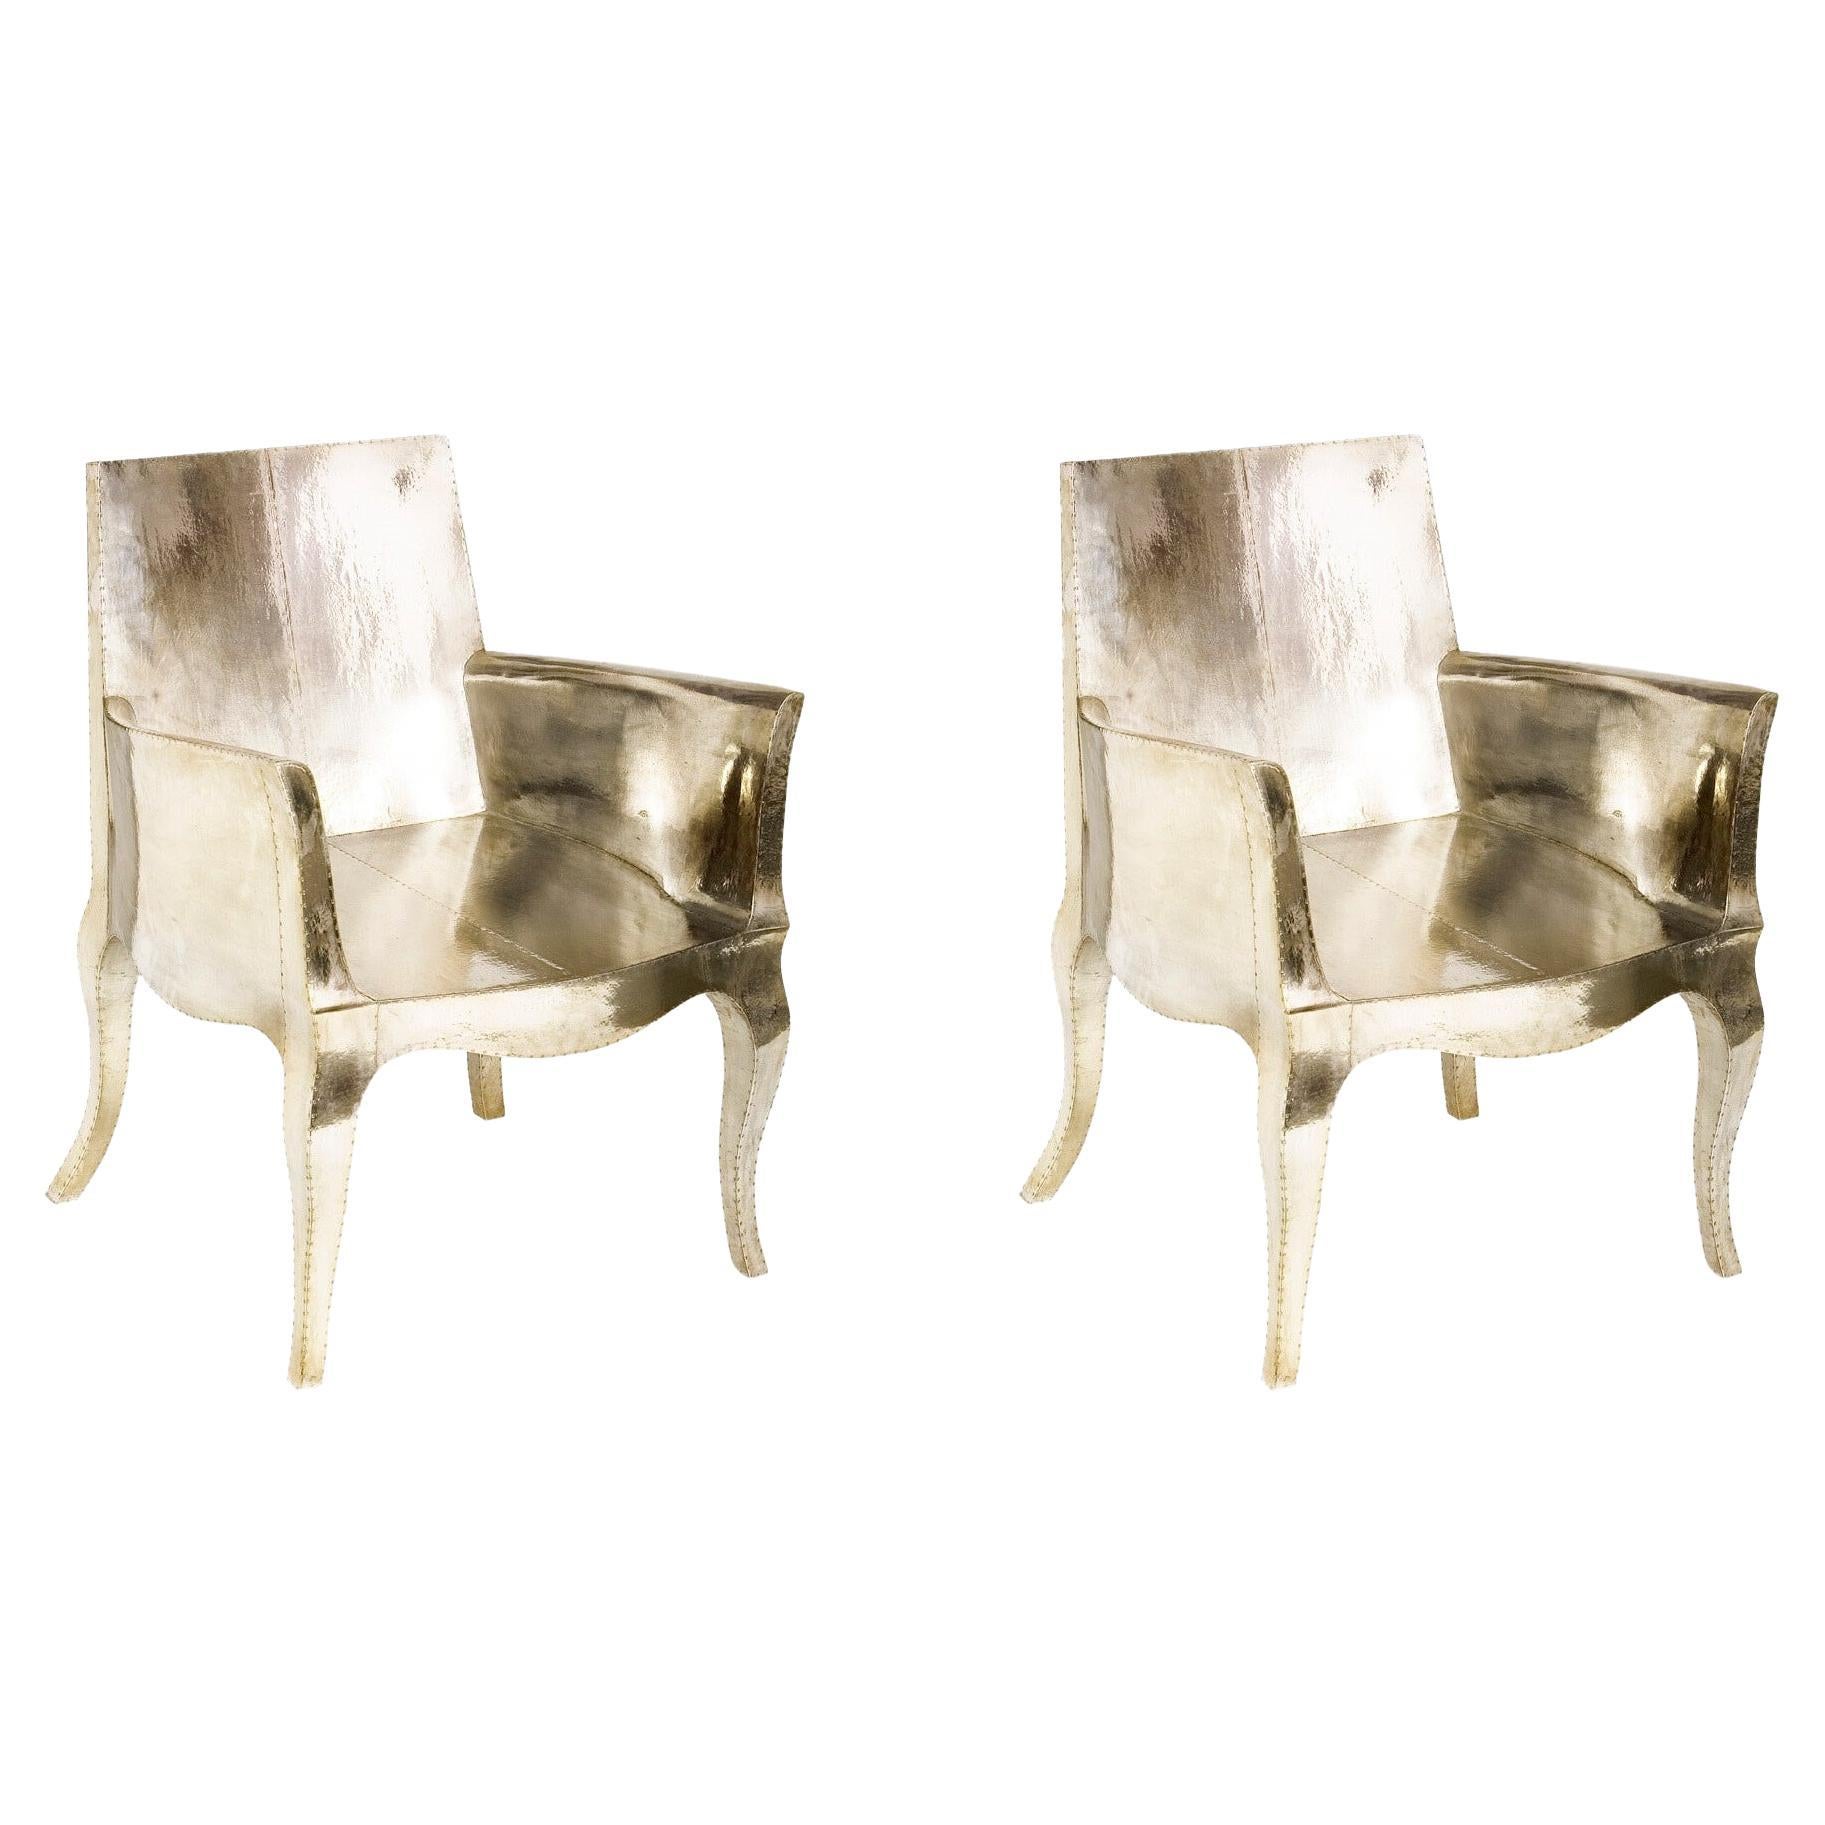 Antique Art Deco Chairs Pair Designed by Paul Mathieu for Stephanie Odegard For Sale